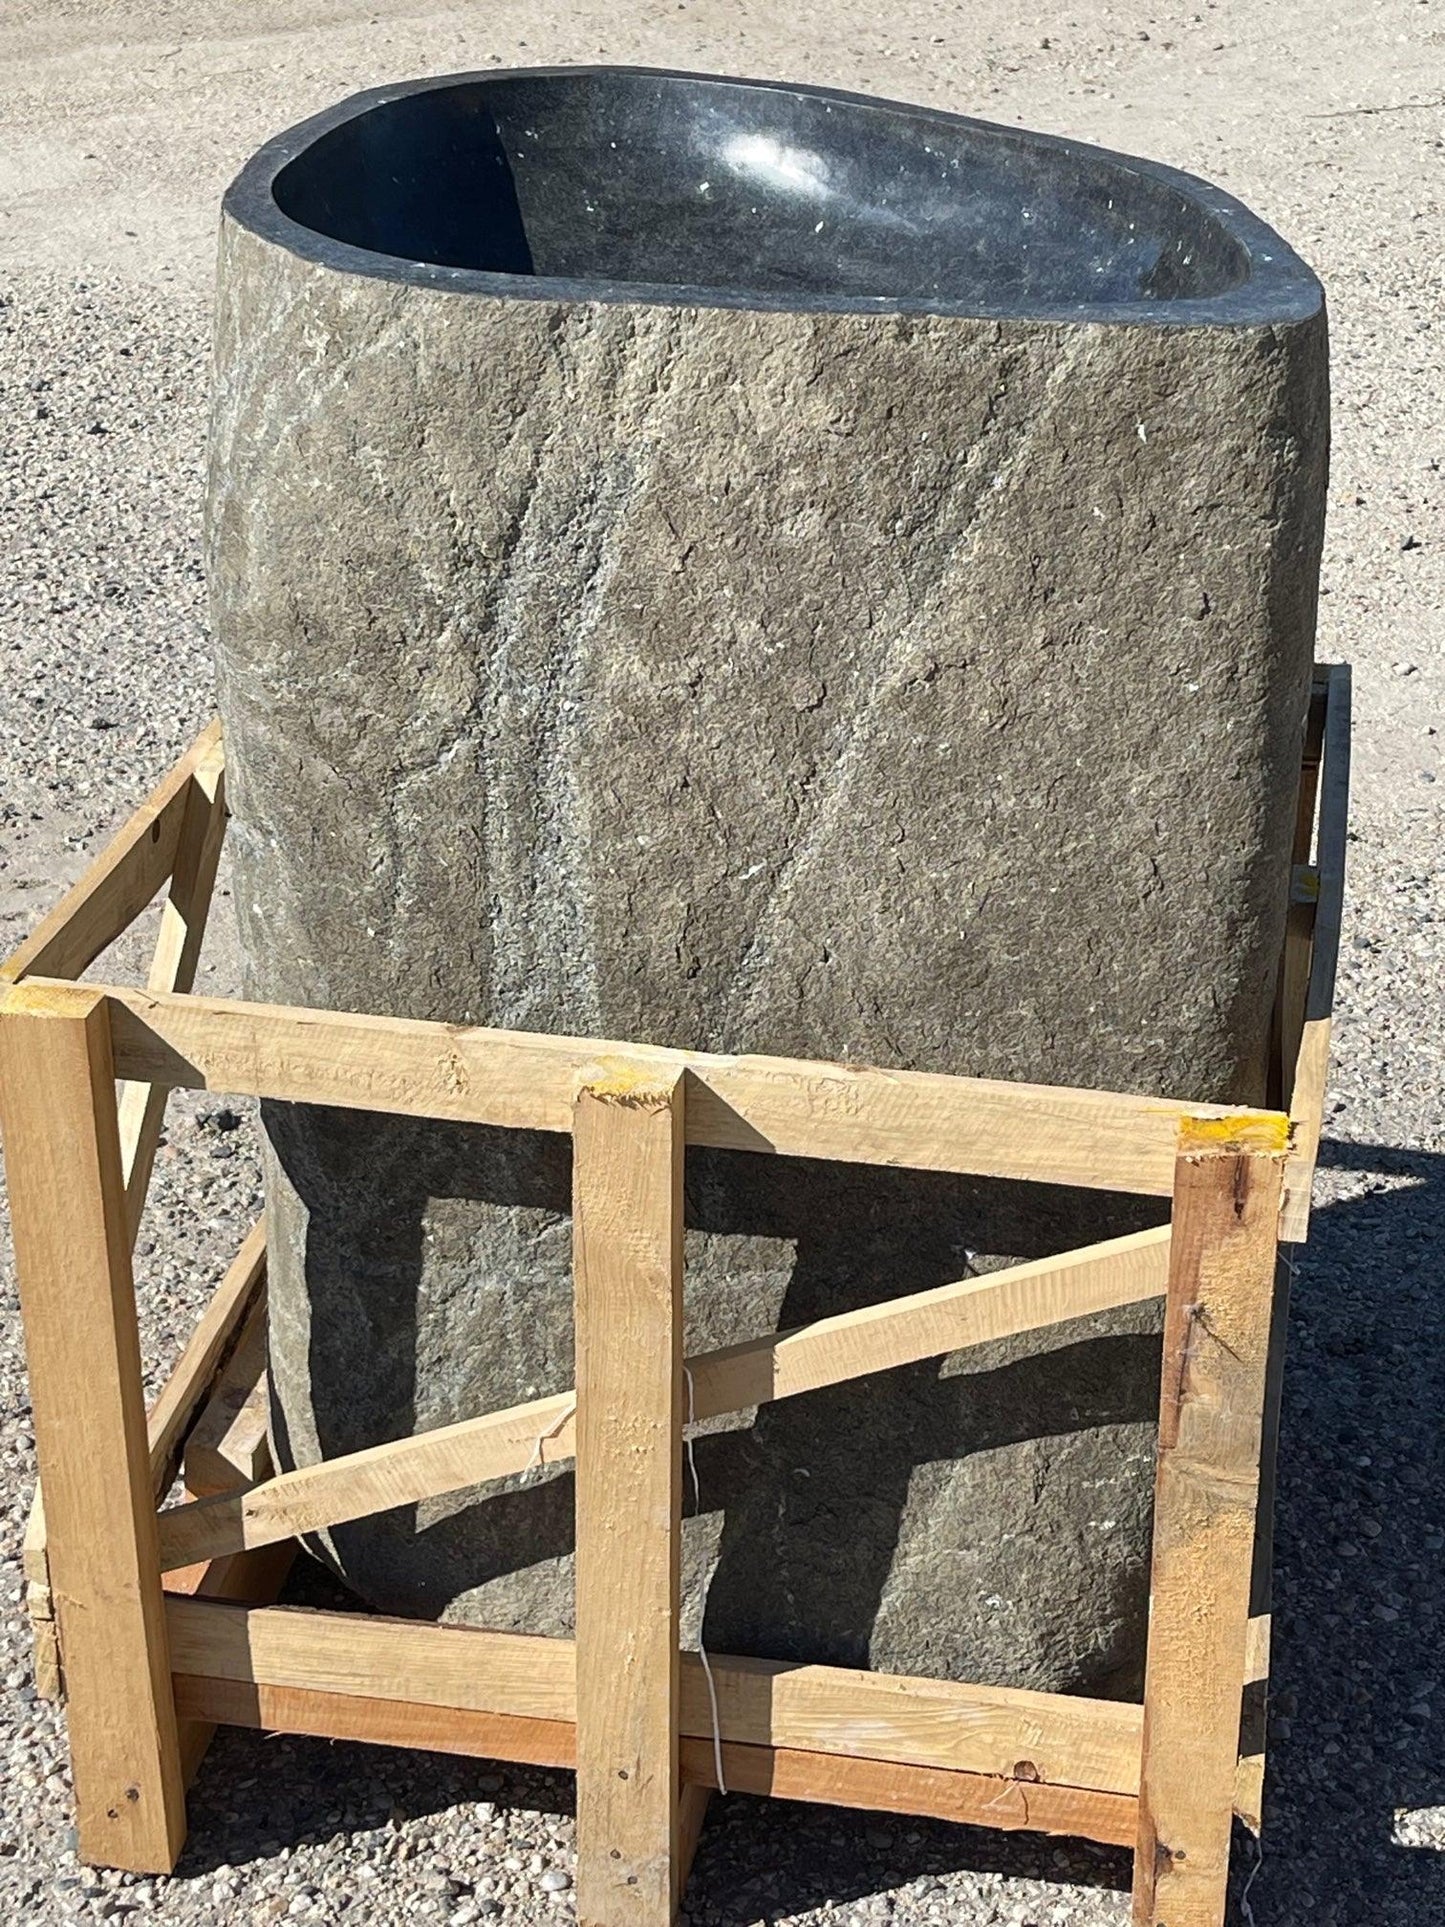 Andesite Stone Pedestal Sink, APED1 - Impact Imports